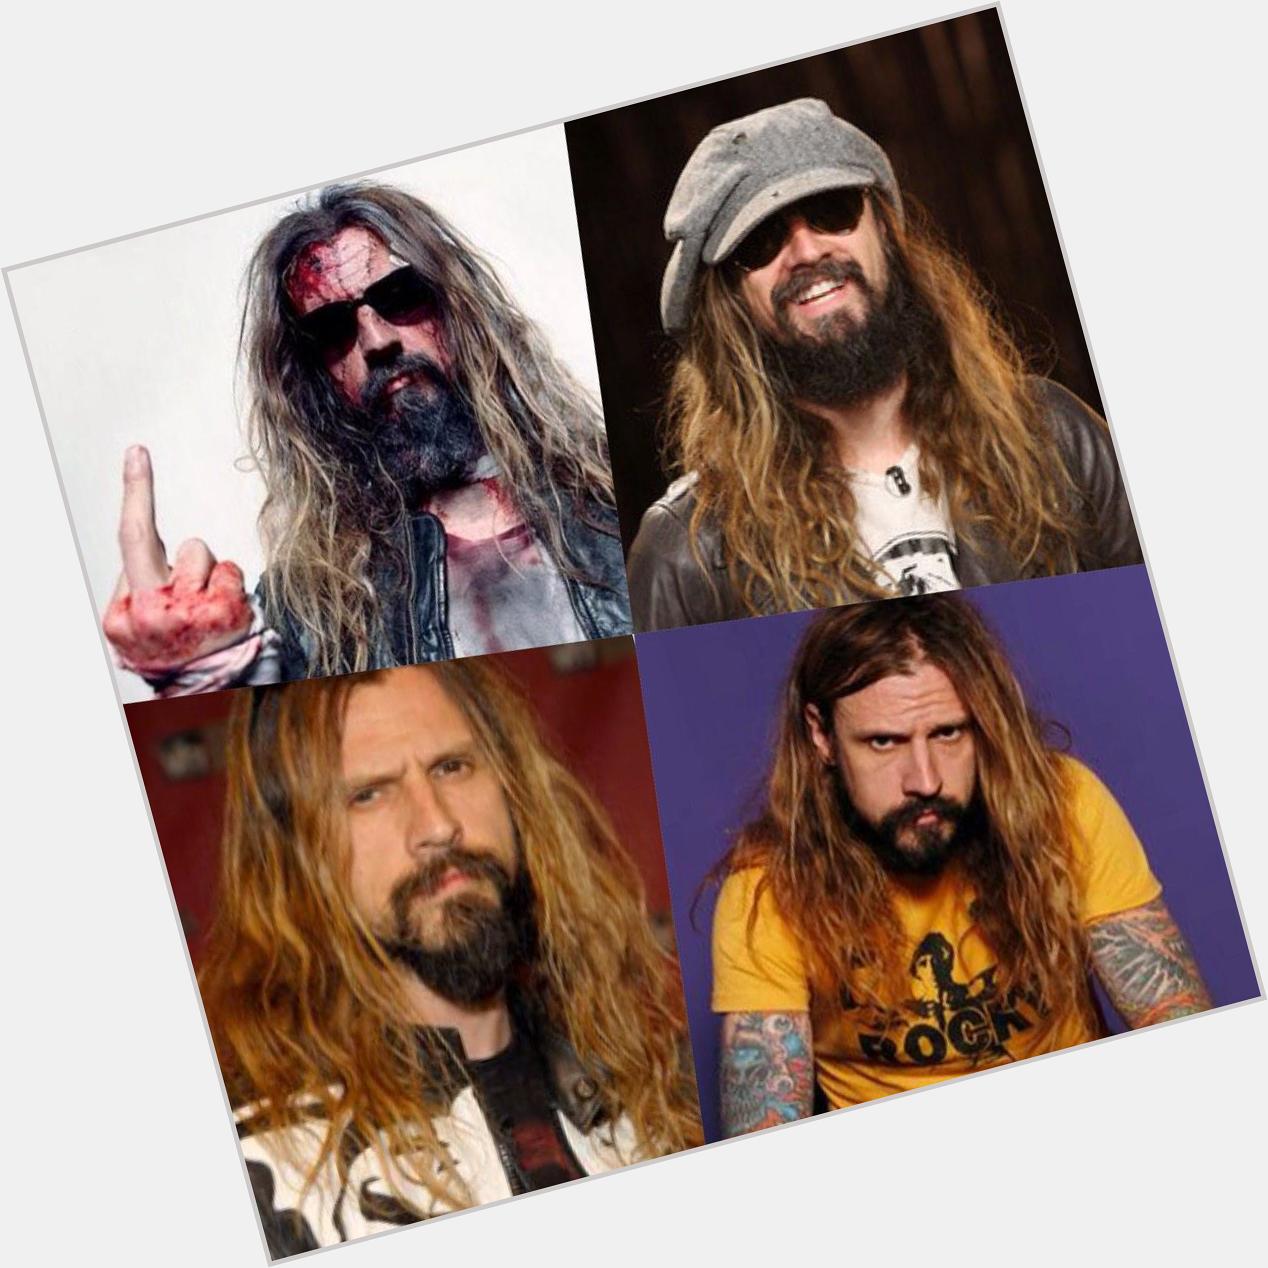 Happy birthday Rob Zombie you crazy person you  much love to you, your music and movies  